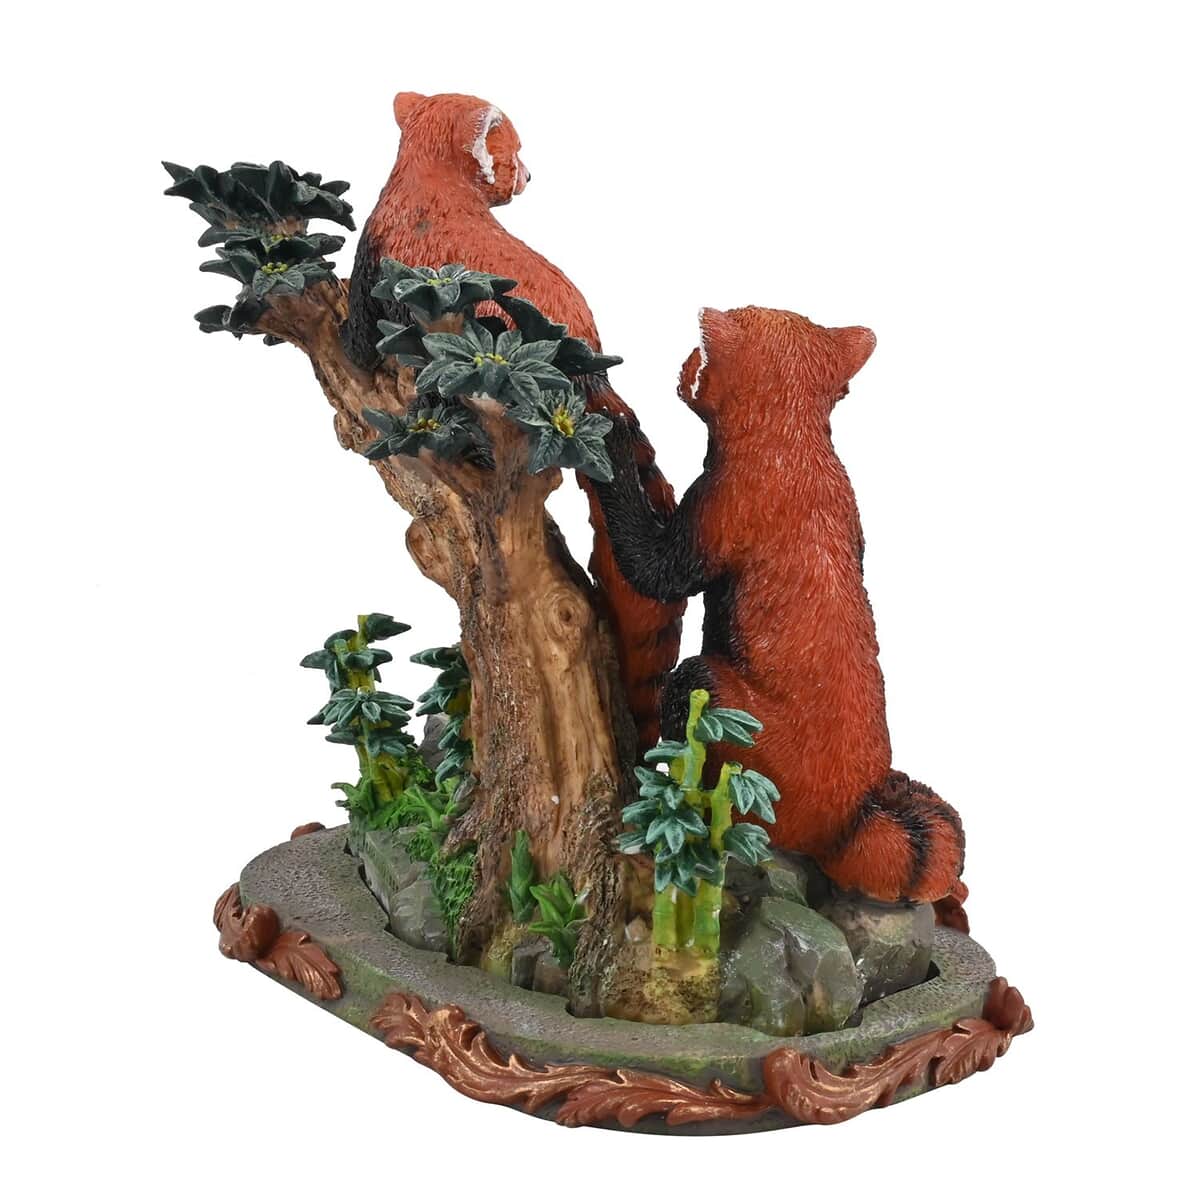 Figurine with Stand - Red Panda (8.75"x6.25"x9") image number 3